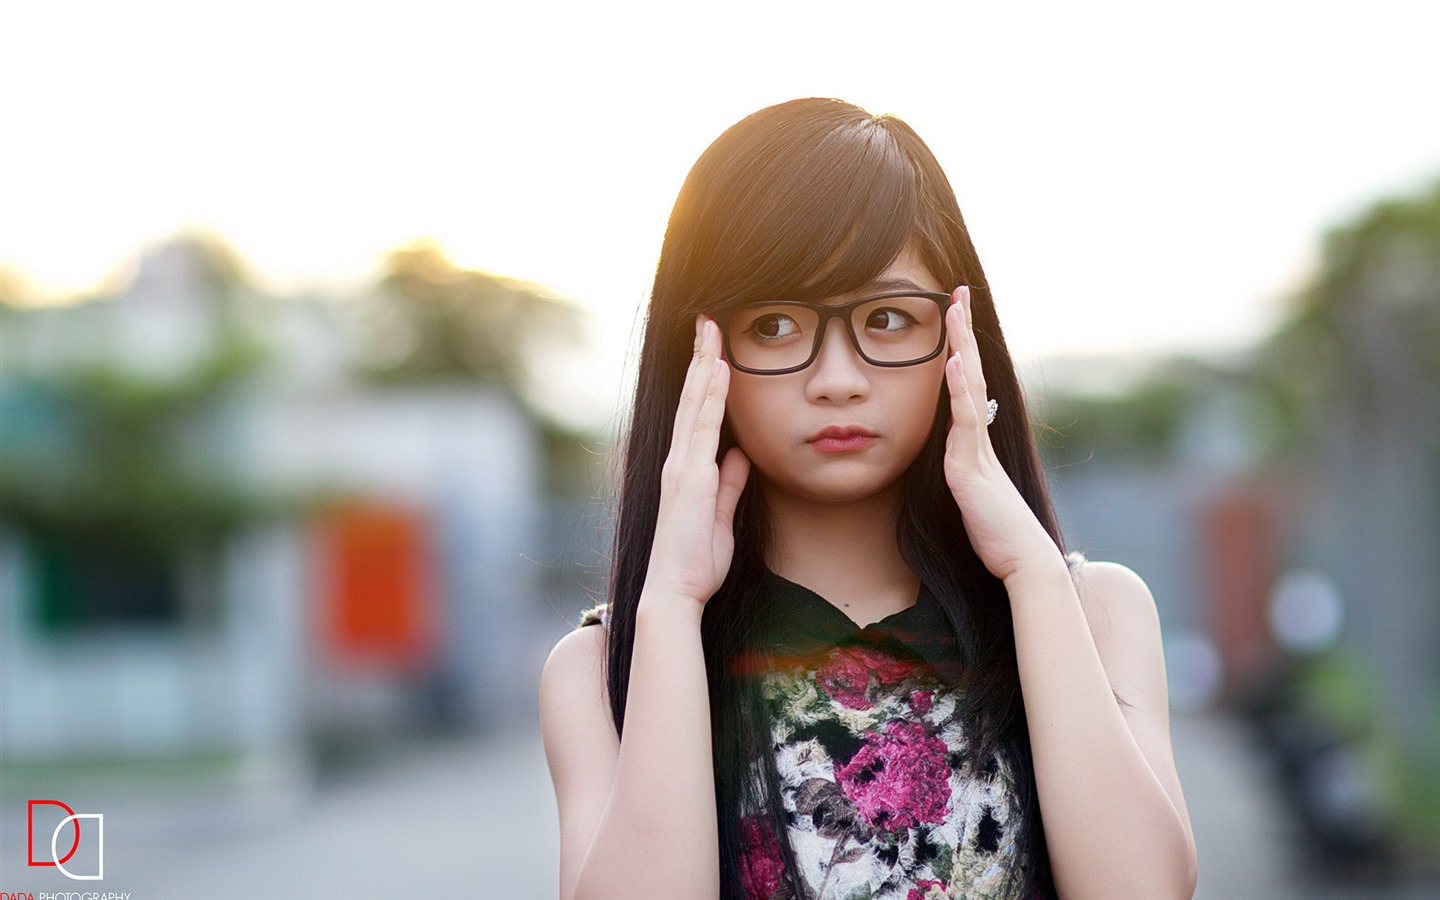 Pure and lovely young Asian girl HD wallpapers collection (3) #34 - 1440x900